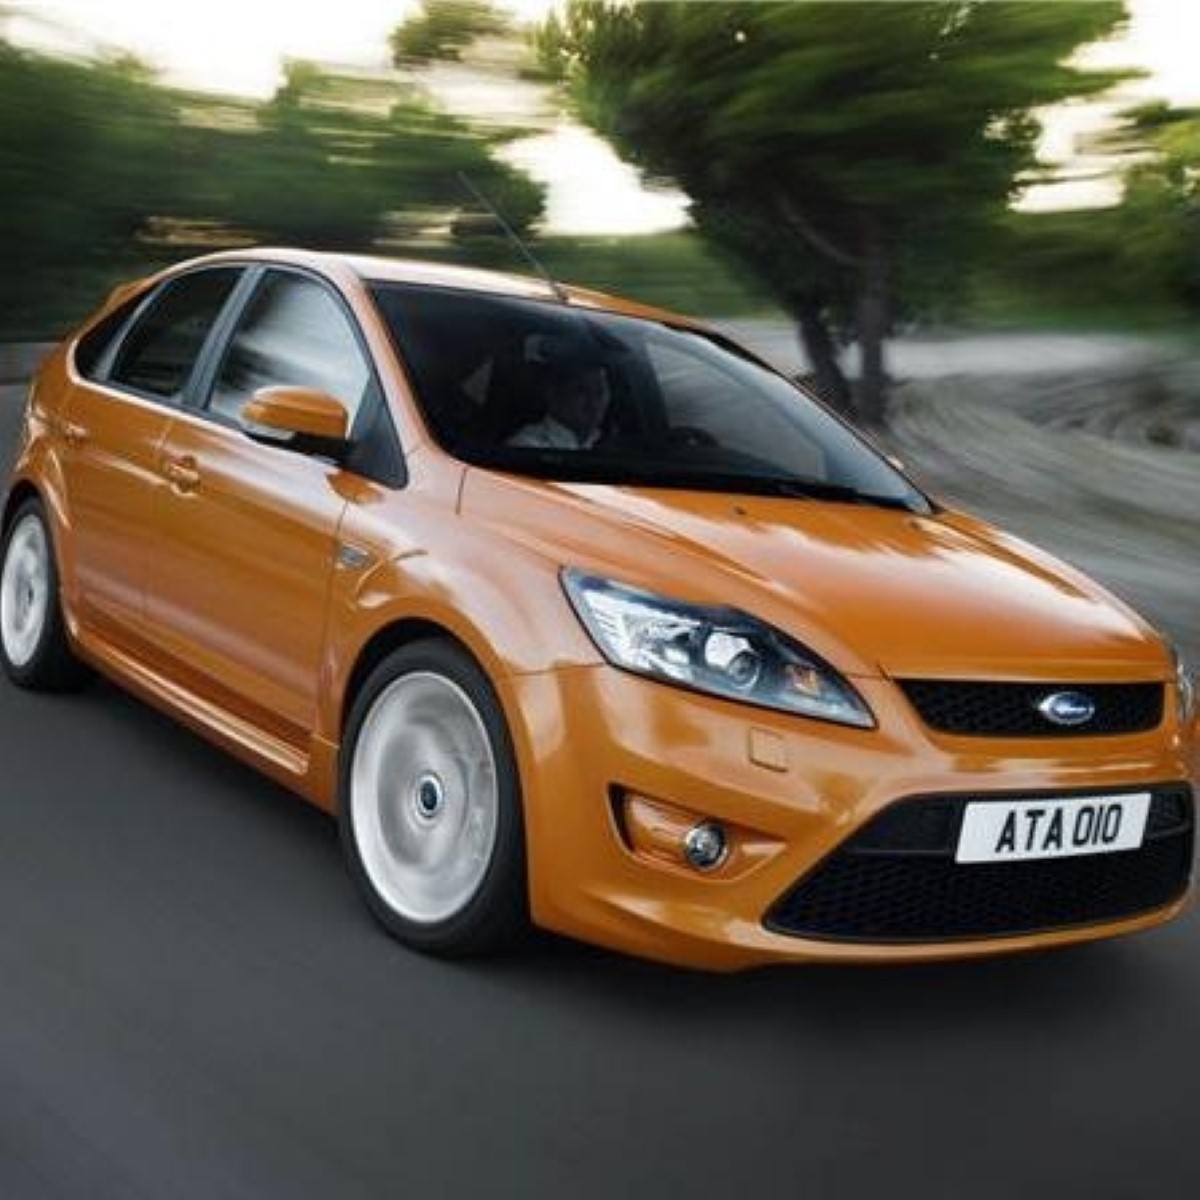 The Focus is considered the benchmark for the small family car sector